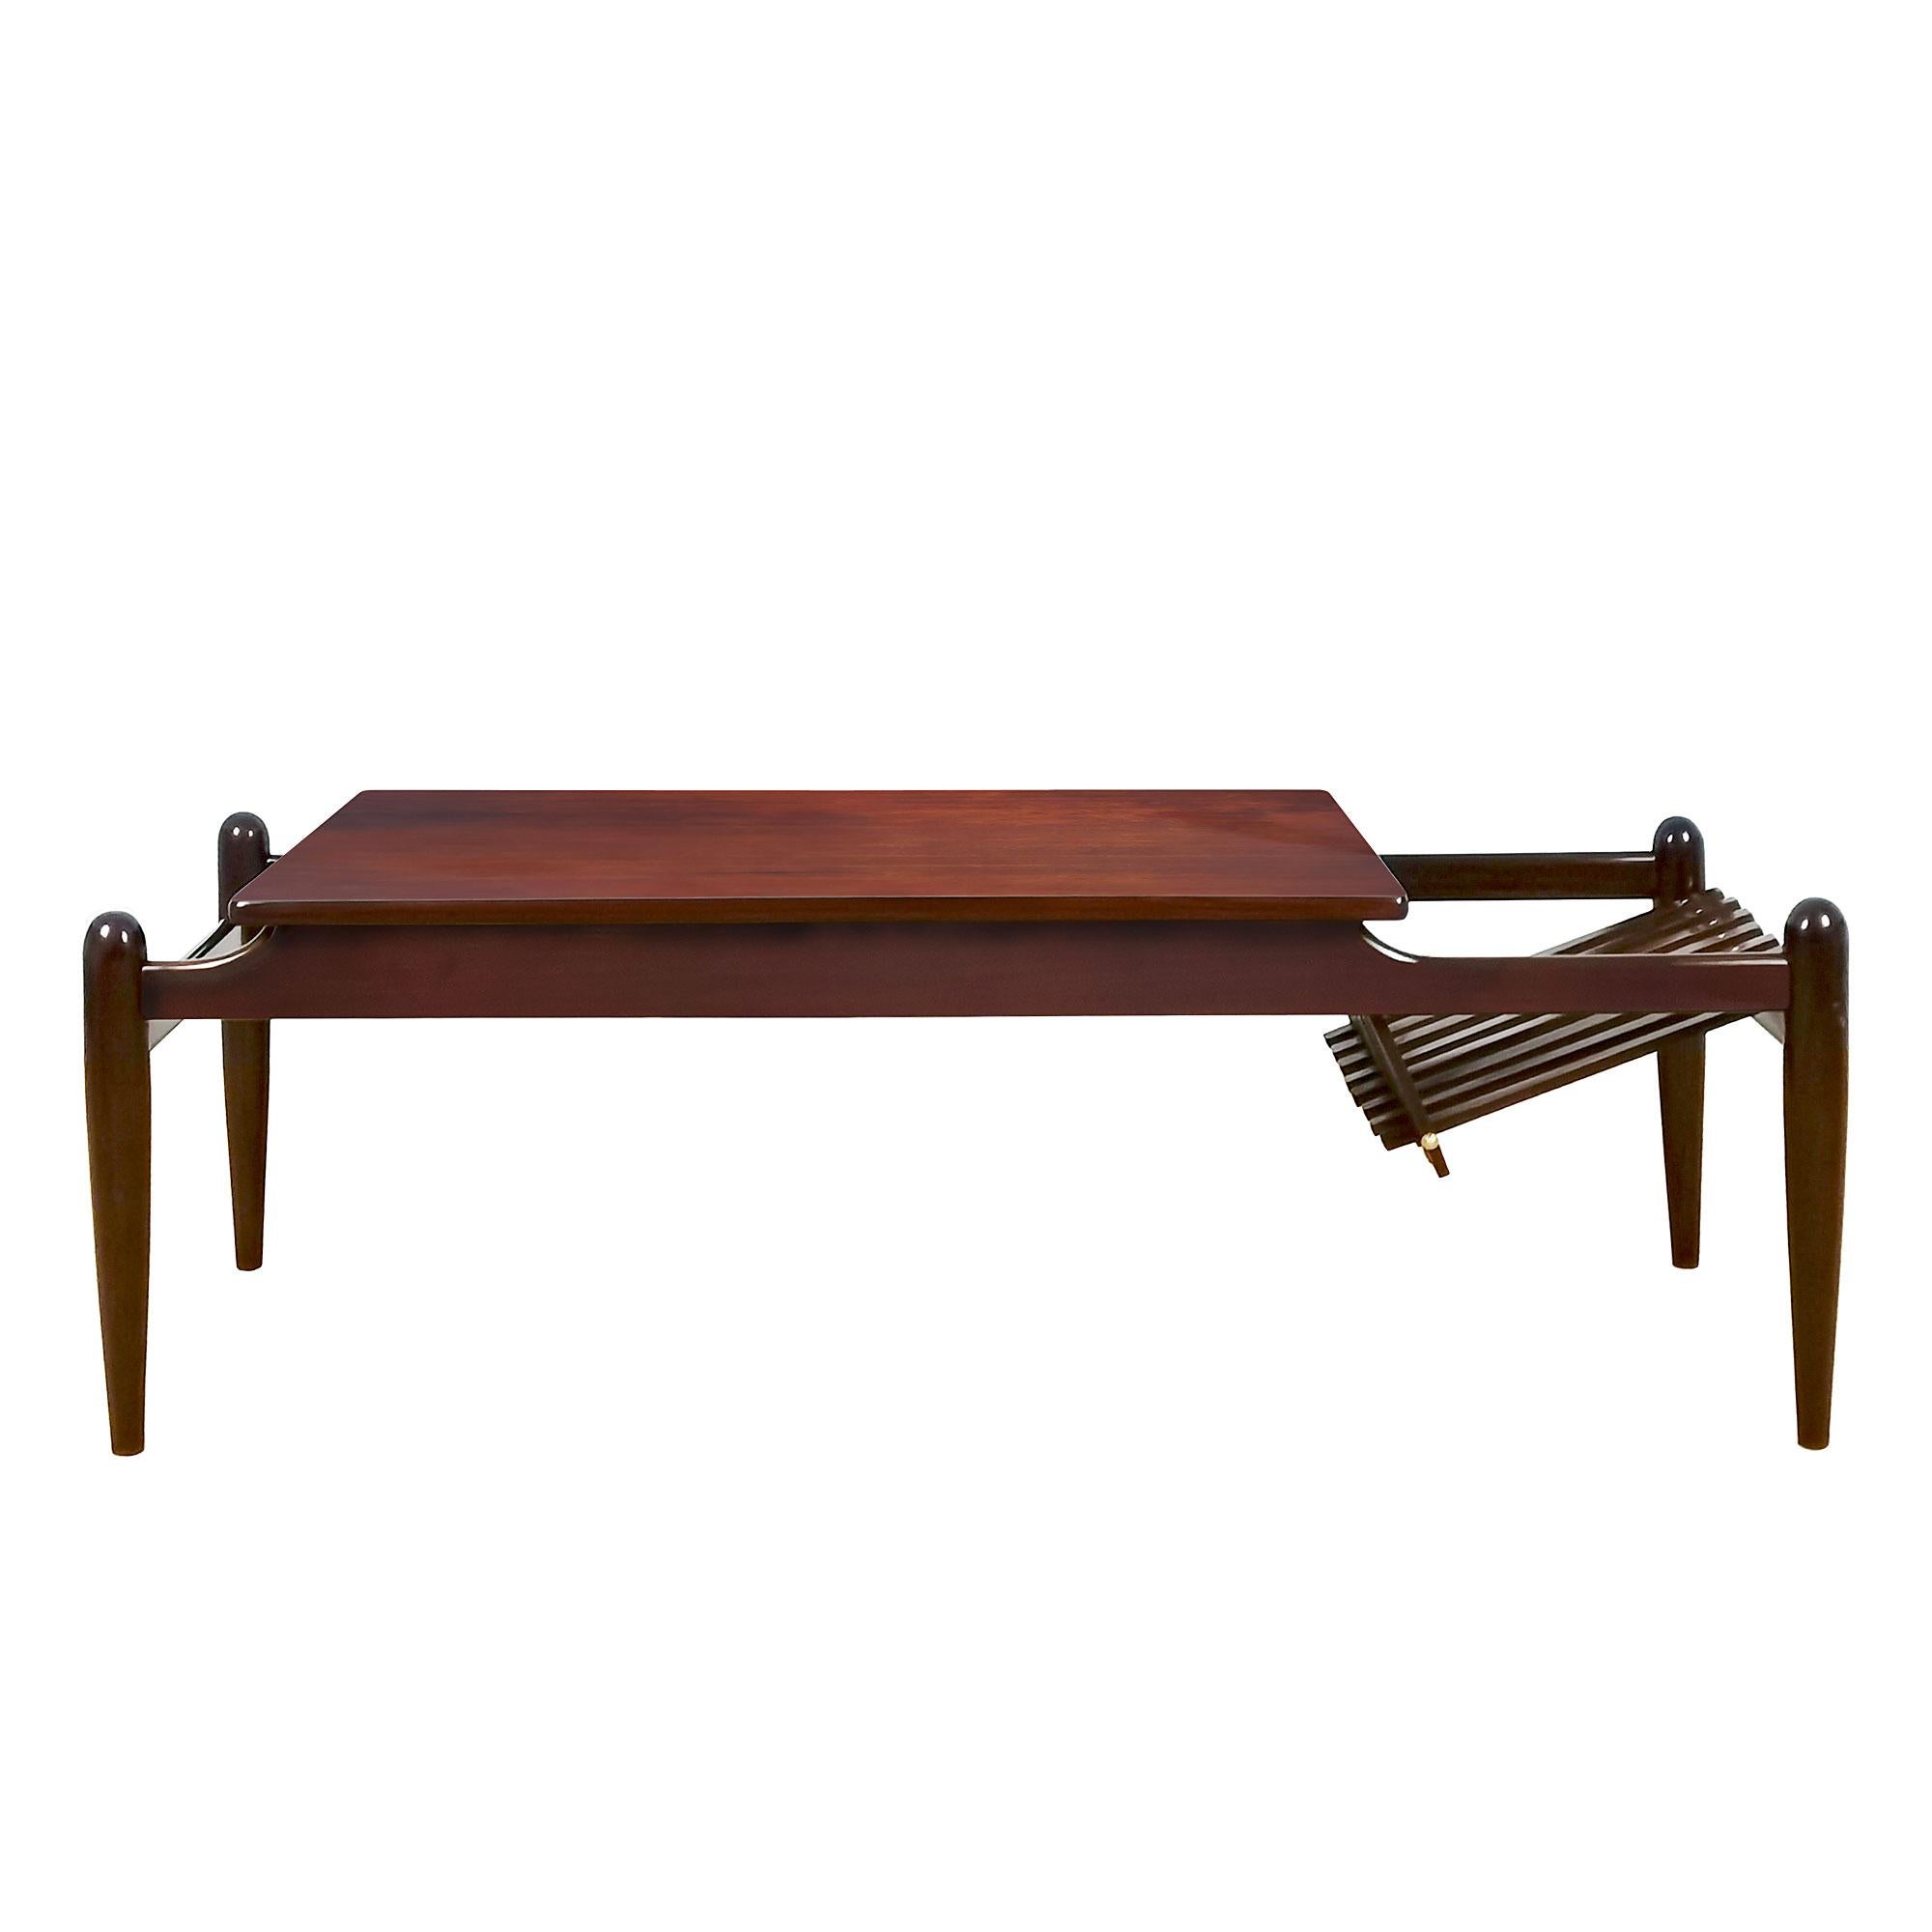 Mid-20th Century Mid-Century Modern Coffee Table with Magazine Rack, Mahogany and Brass - Italy For Sale